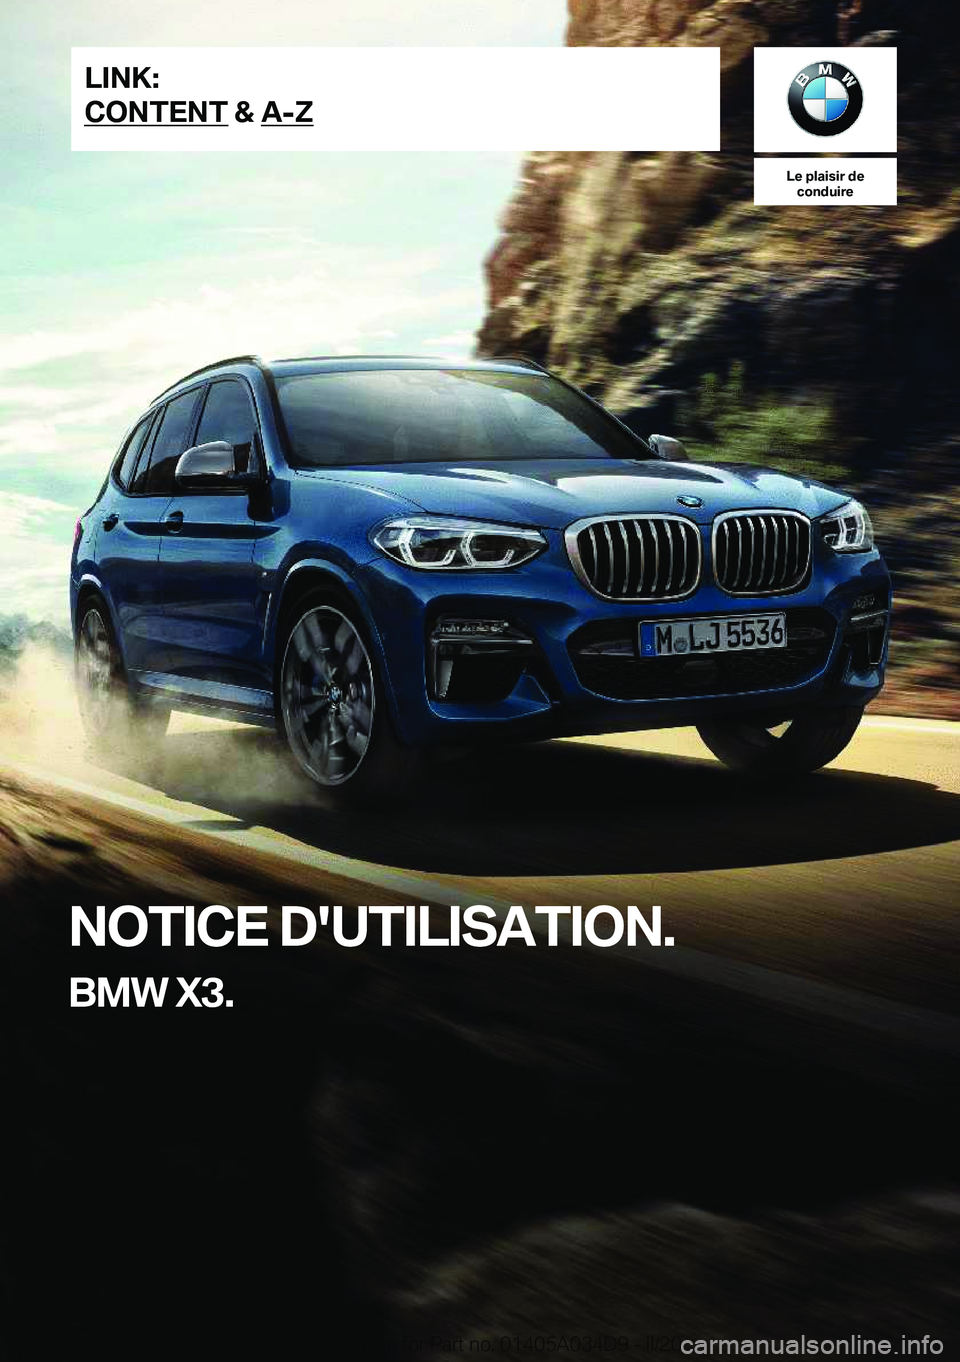 BMW X3 2020  Notices Demploi (in French) �L�e��p�l�a�i�s�i�r��d�e�c�o�n�d�u�i�r�e
�N�O�T�I�C�E��D�'�U�T�I�L�I�S�A�T�I�O�N�.
�B�M�W��X�3�.�L�I�N�K�:
�C�O�N�T�E�N�T��&��A�-�Z�O�n�l�i�n�e��E�d�i�t�i�o�n��f�o�r��P�a�r�t��n�o�.��0�